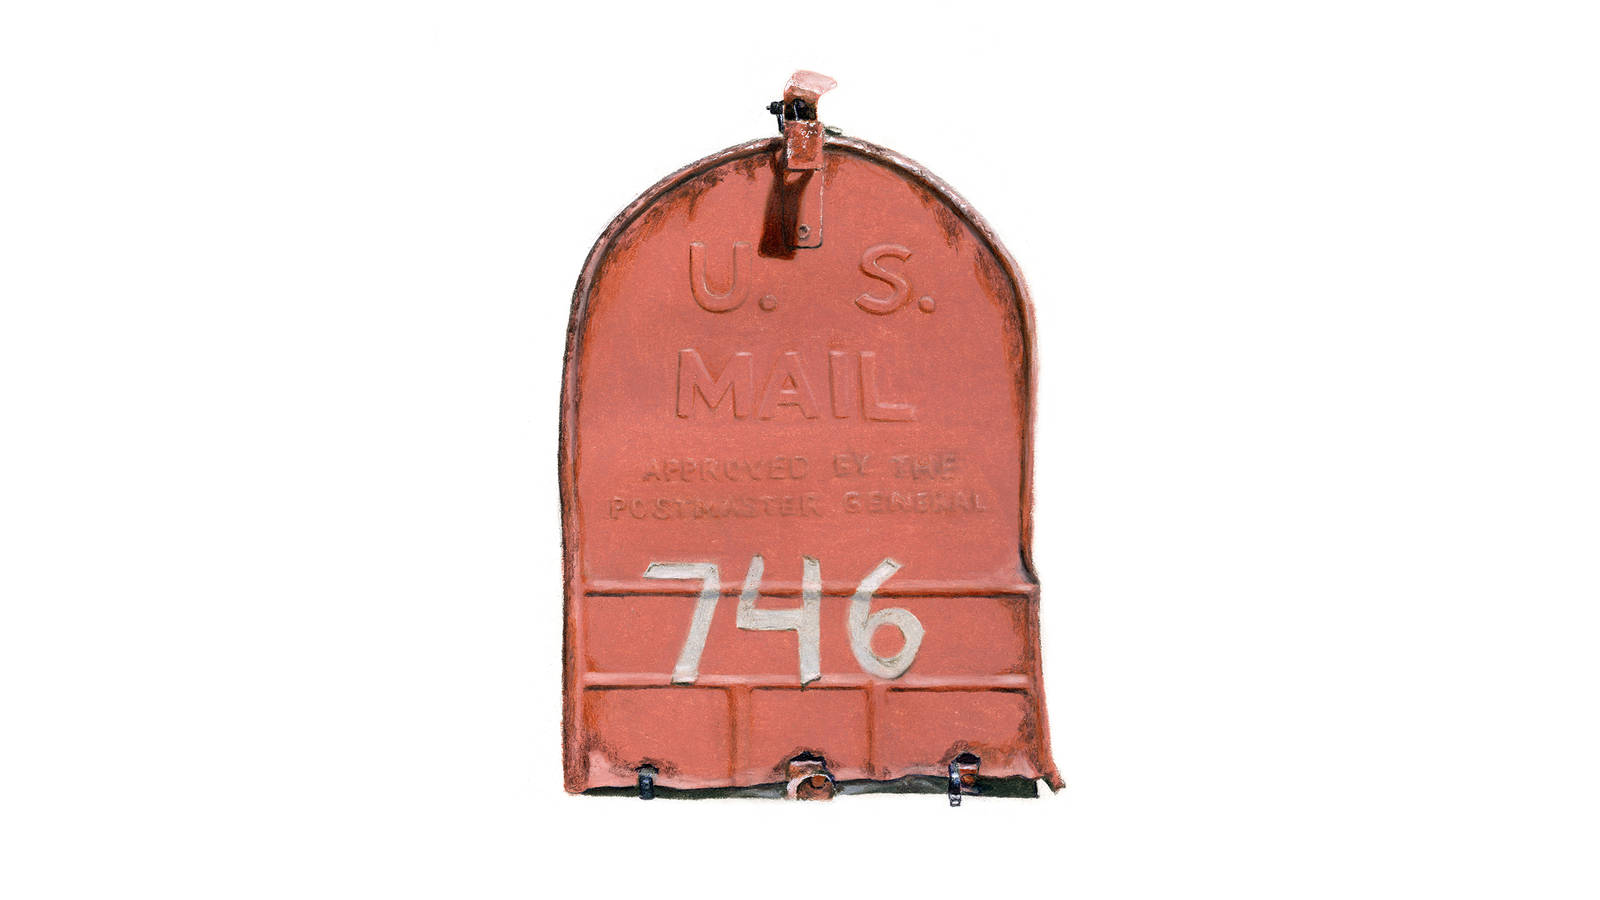 <h3 style="text-align: center; padding: 50px;"><span class="text-Intro-style">A mailbox outside the 19th-century caretaker’s house Heckel stayed in during her residency at Weir Farm National Historic Site in Connecticut. Colored pencil on paper, 2016.</span></h3>